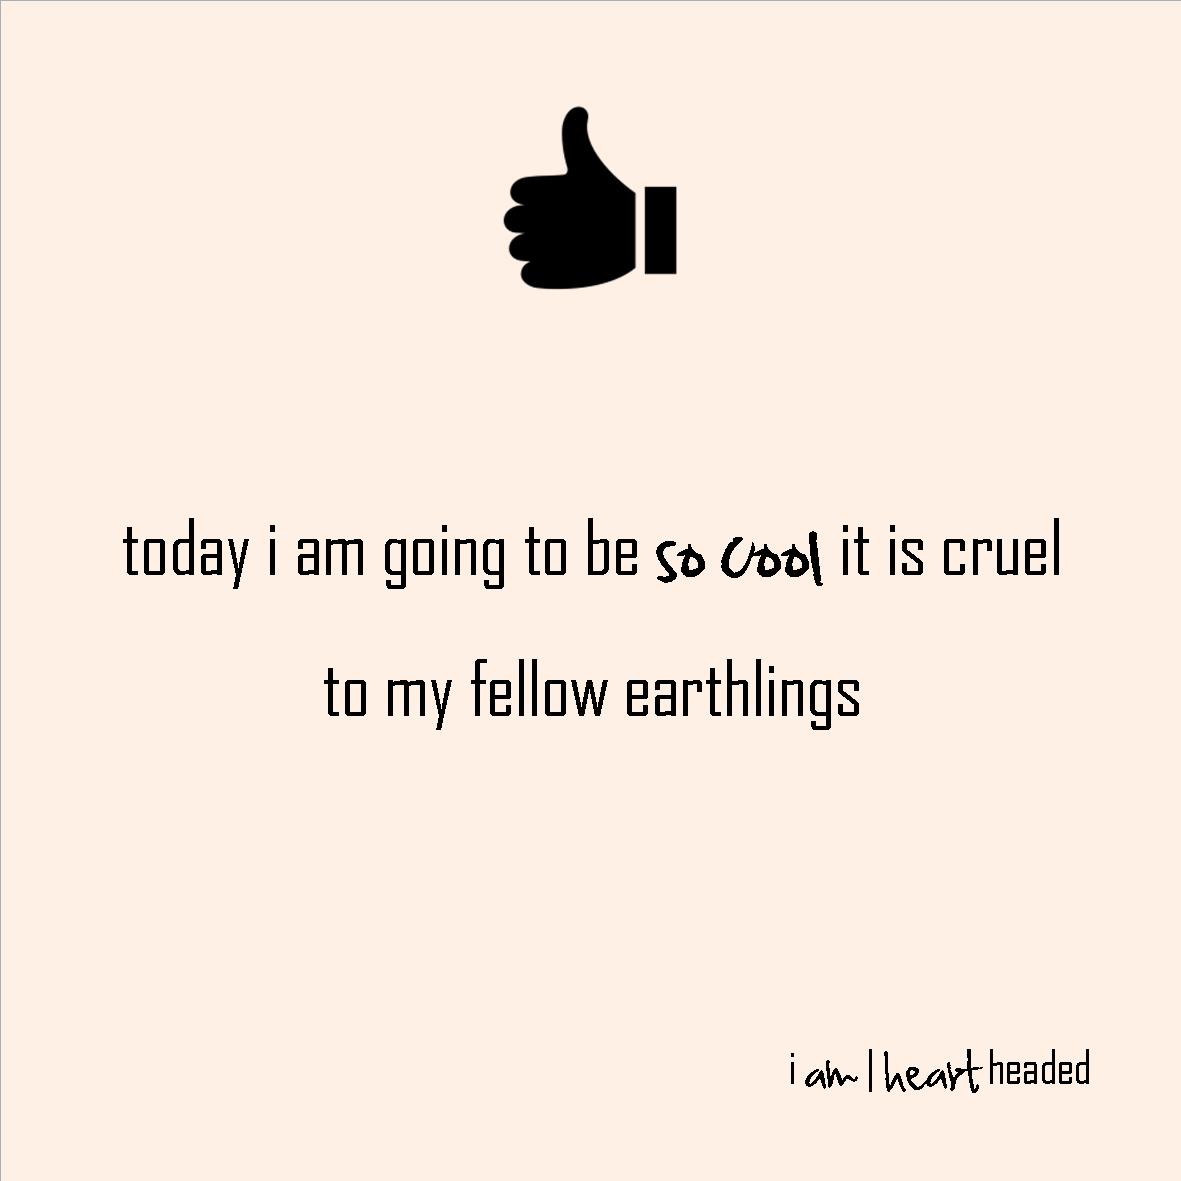 full-size featured image of quote 'so cool it is cruel' in category 'wacky' at i am | heart headed